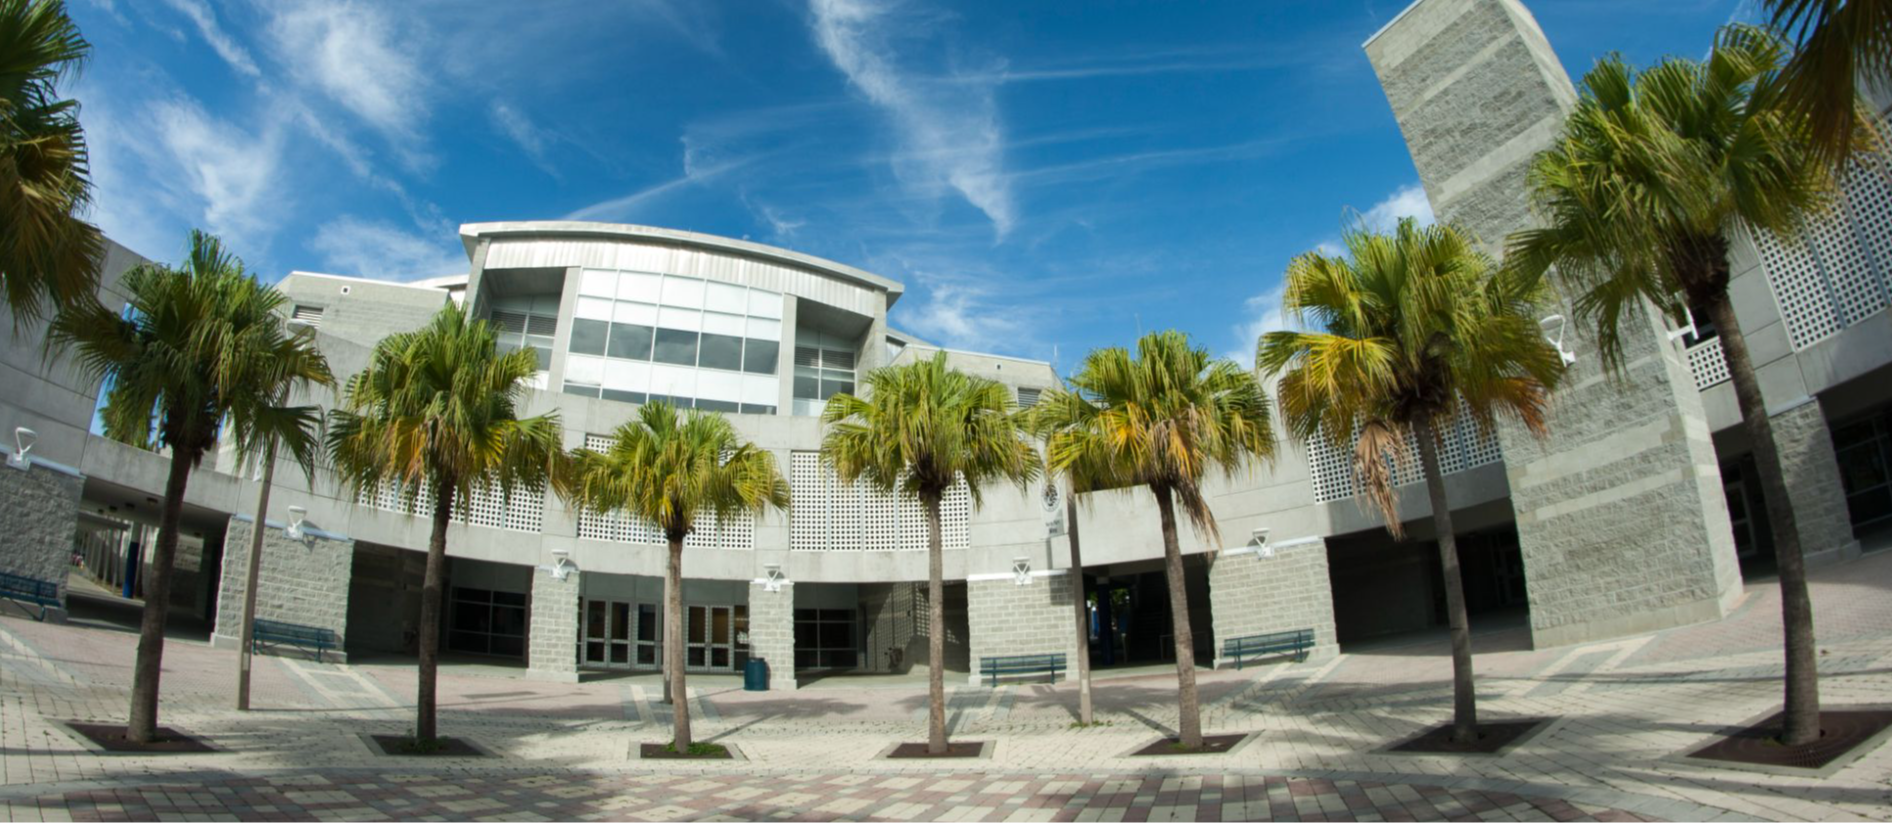 outside image of north port high